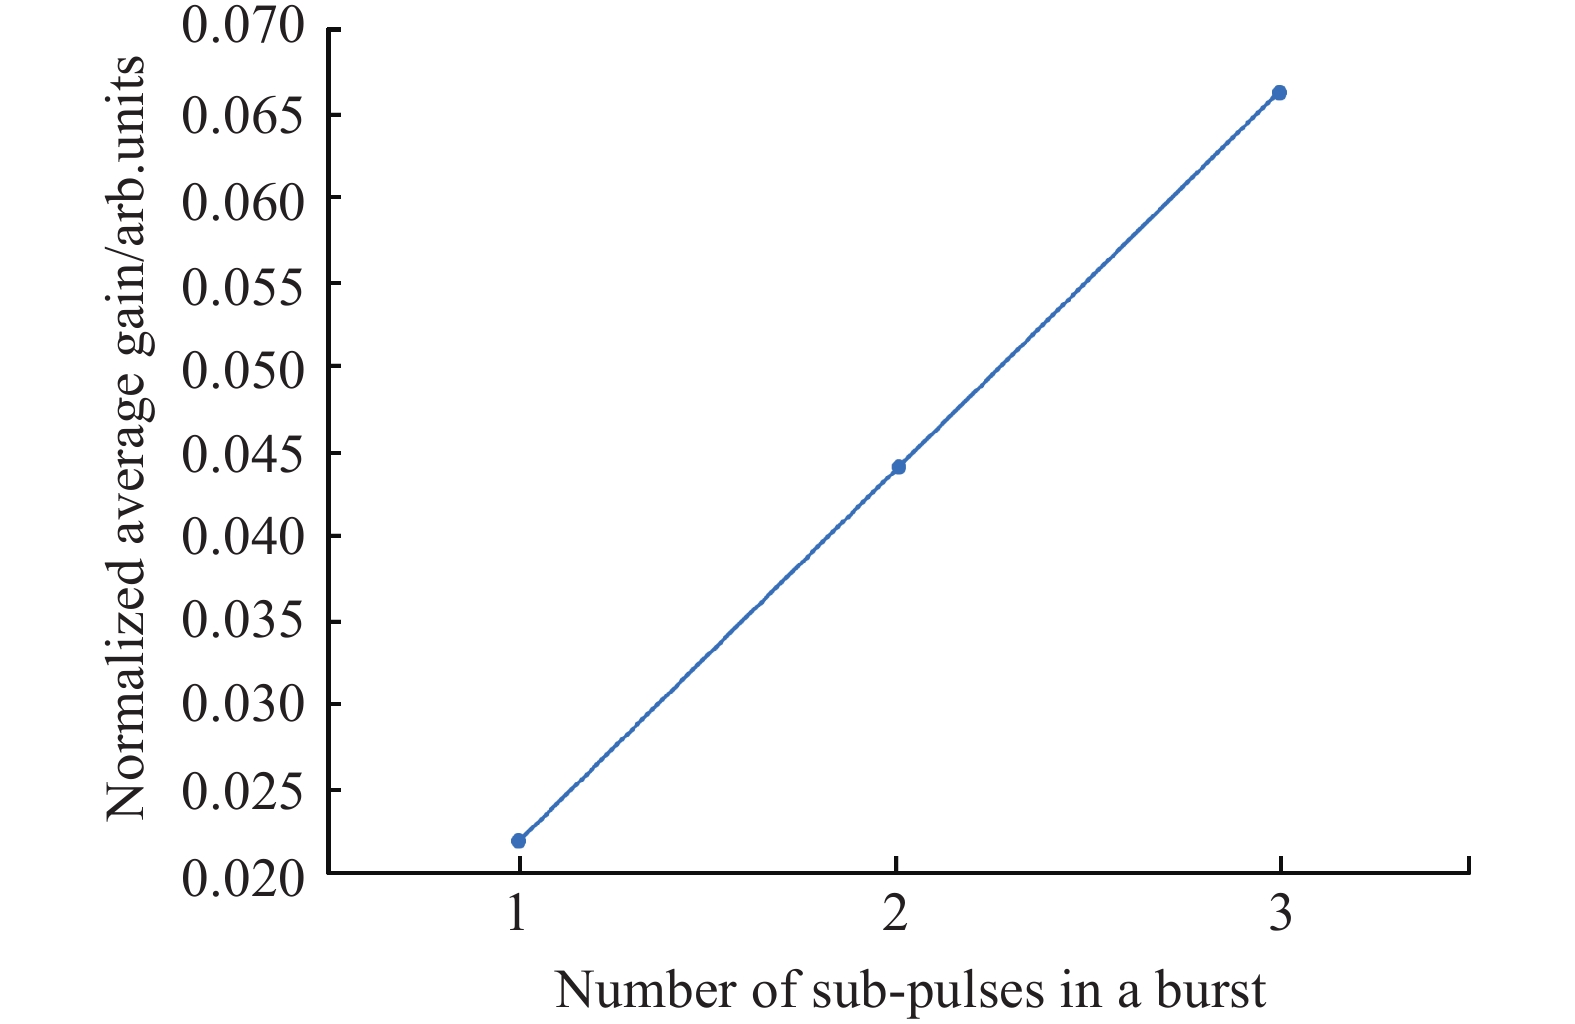 The normalized average gain within an optical excitation period versus the number of sub-pulses in a burst